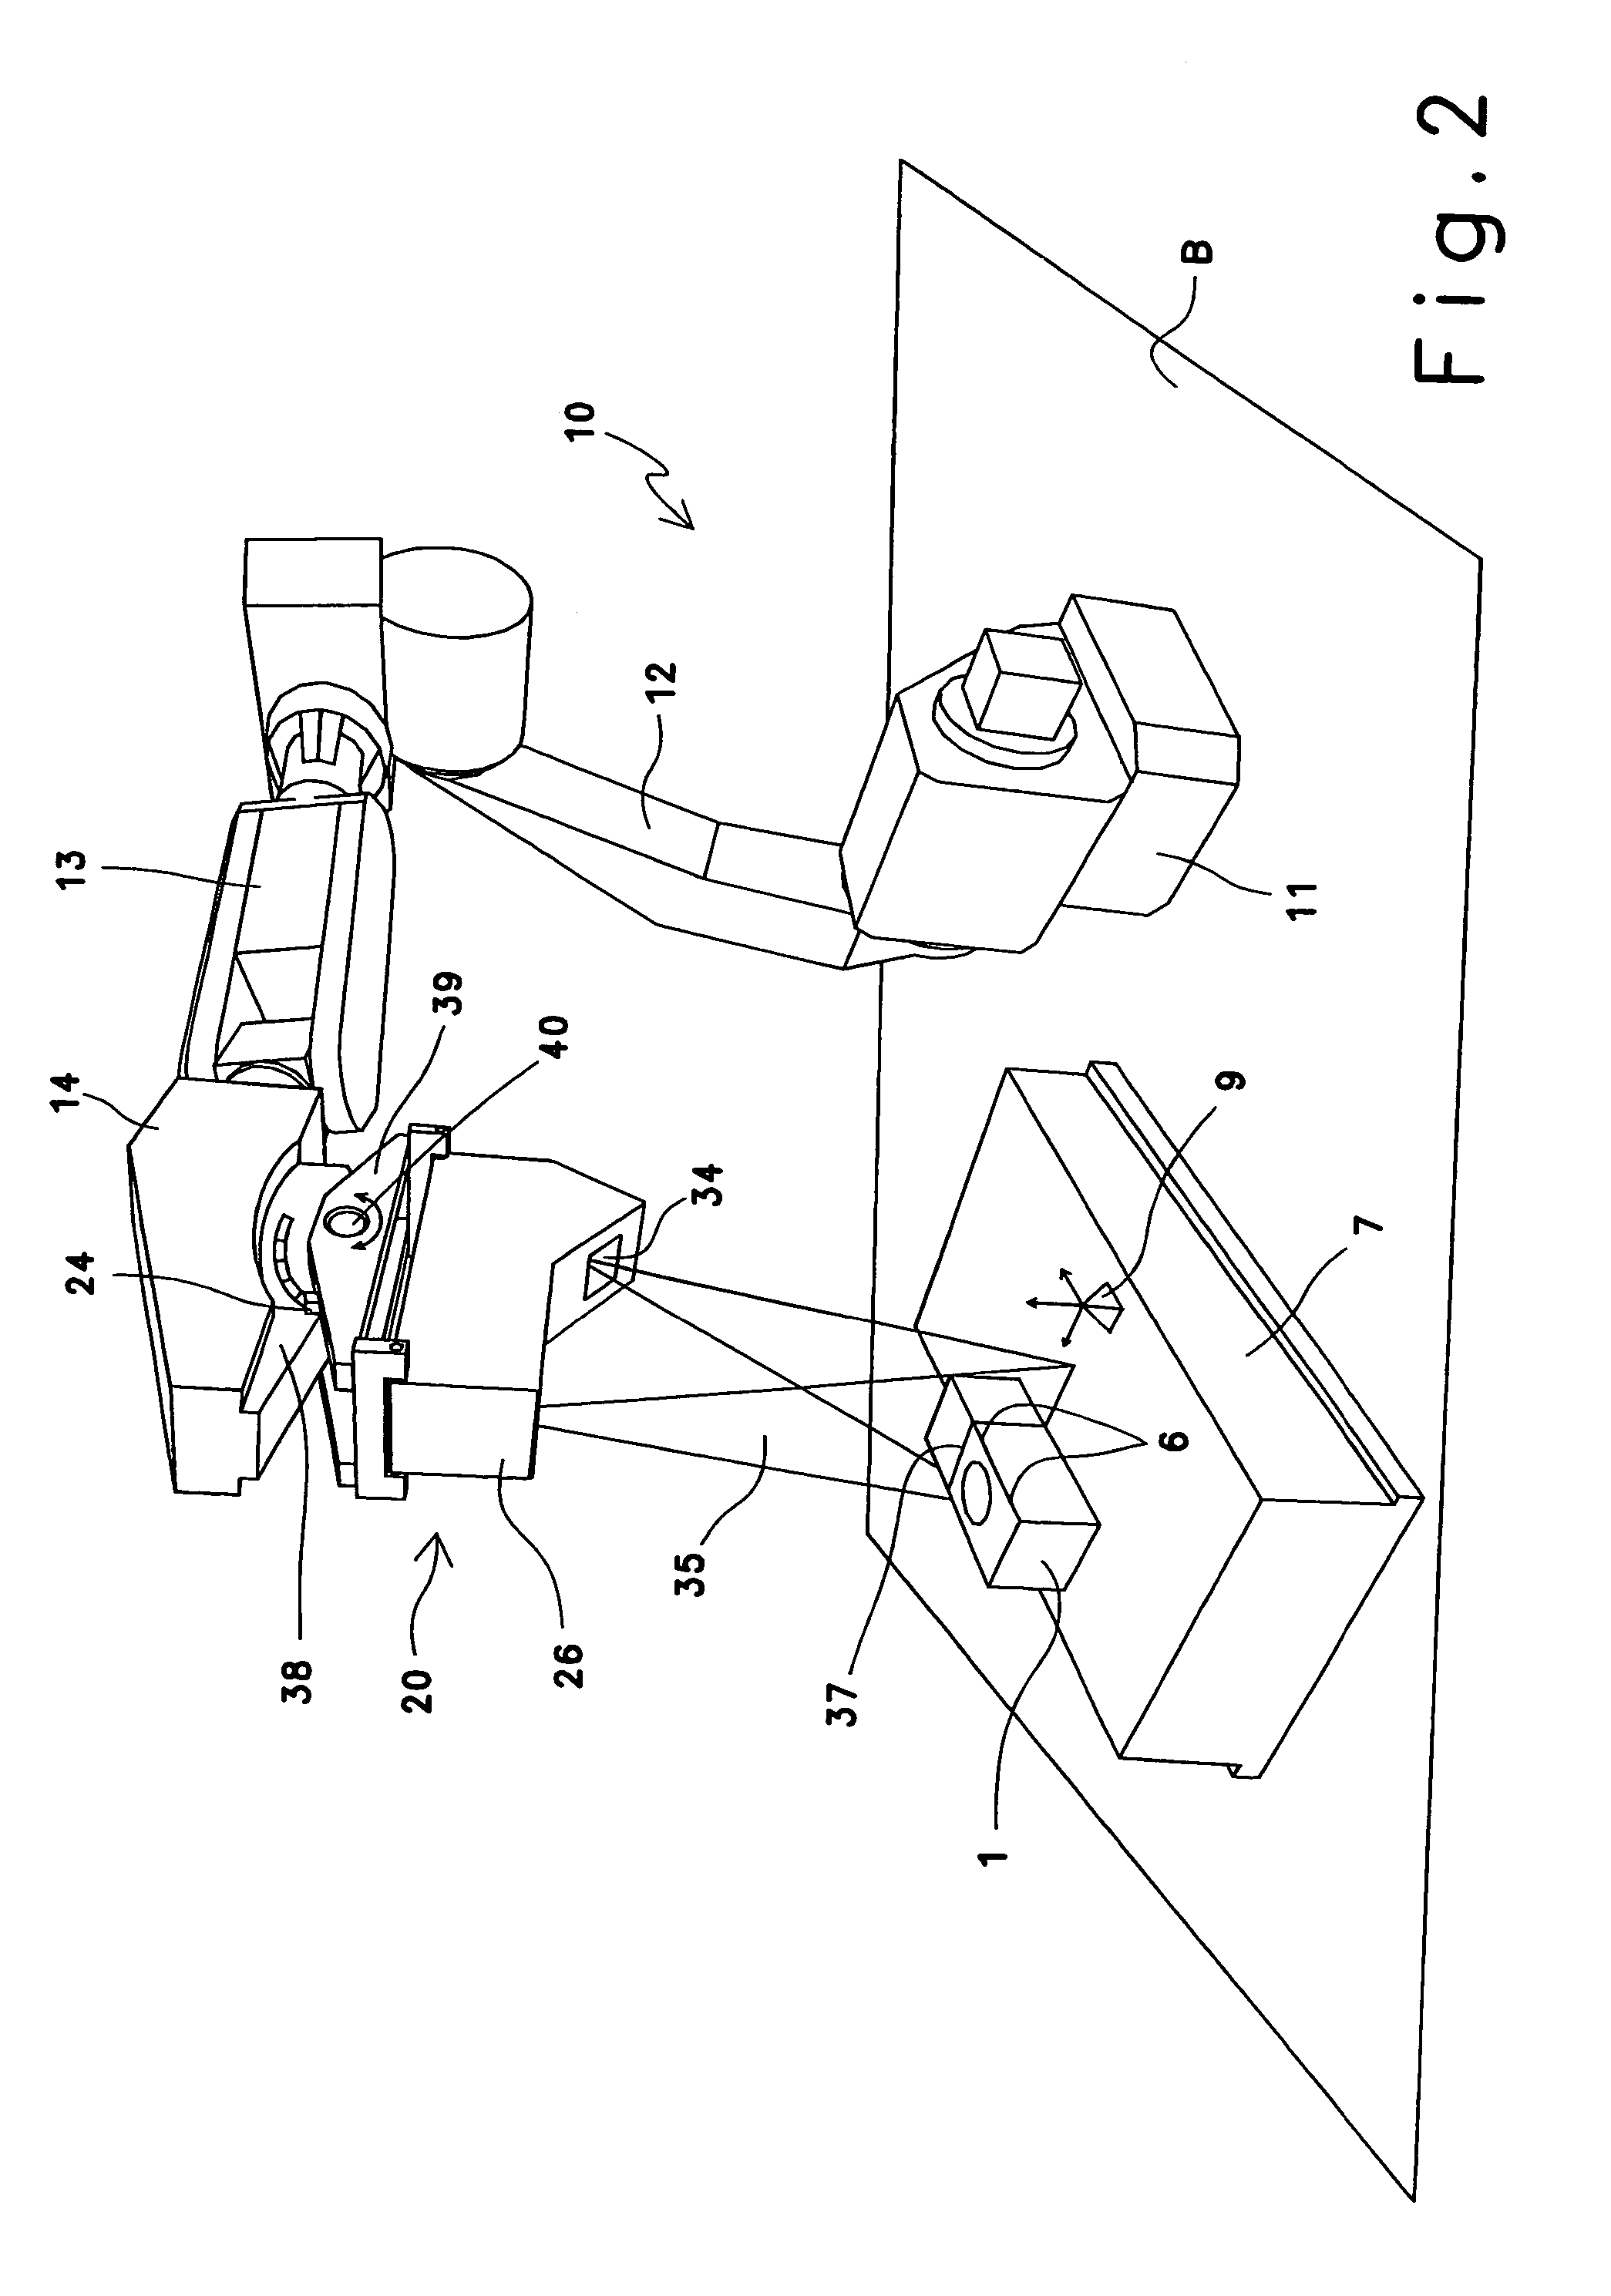 Device and method for measuring components